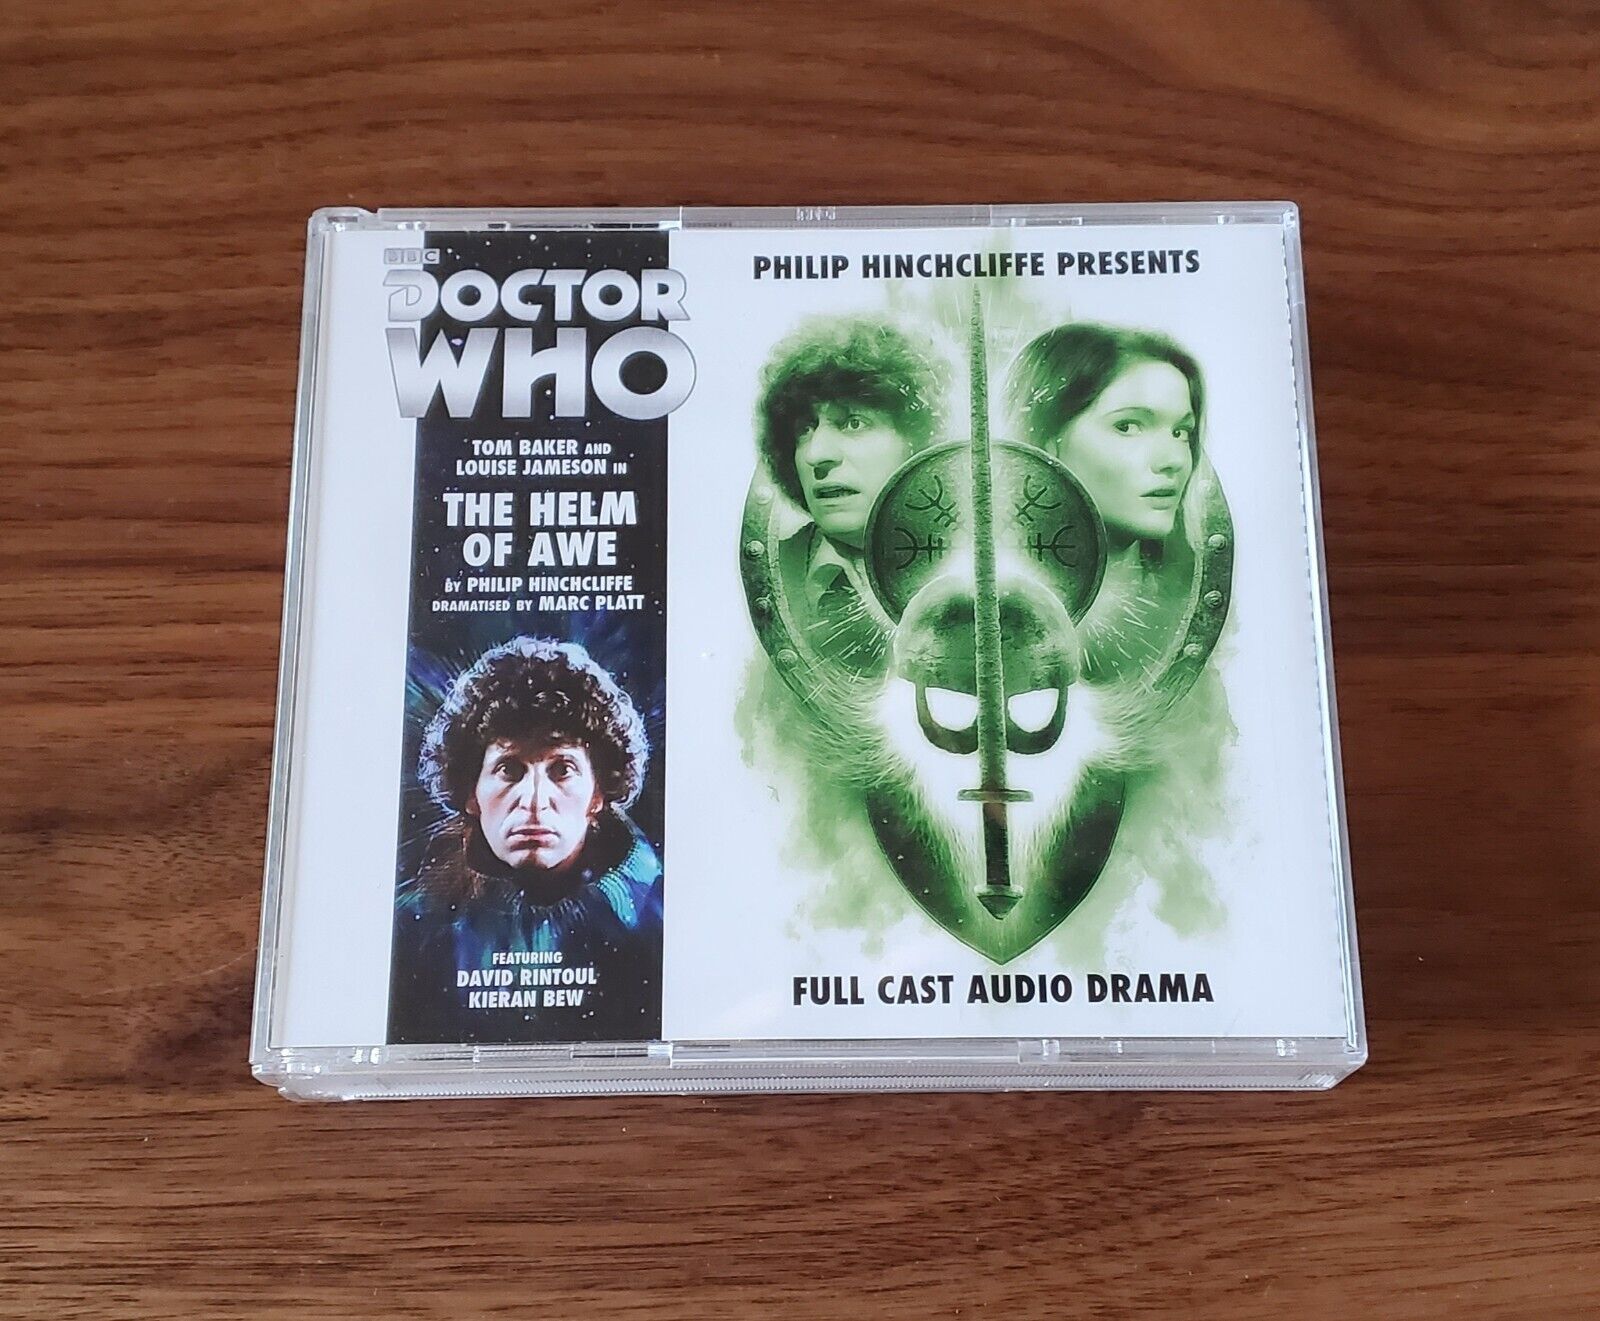 Doctor Who The Helm of Awe Philip Hinchcliffe Presents PHP 2.2 Big Finish